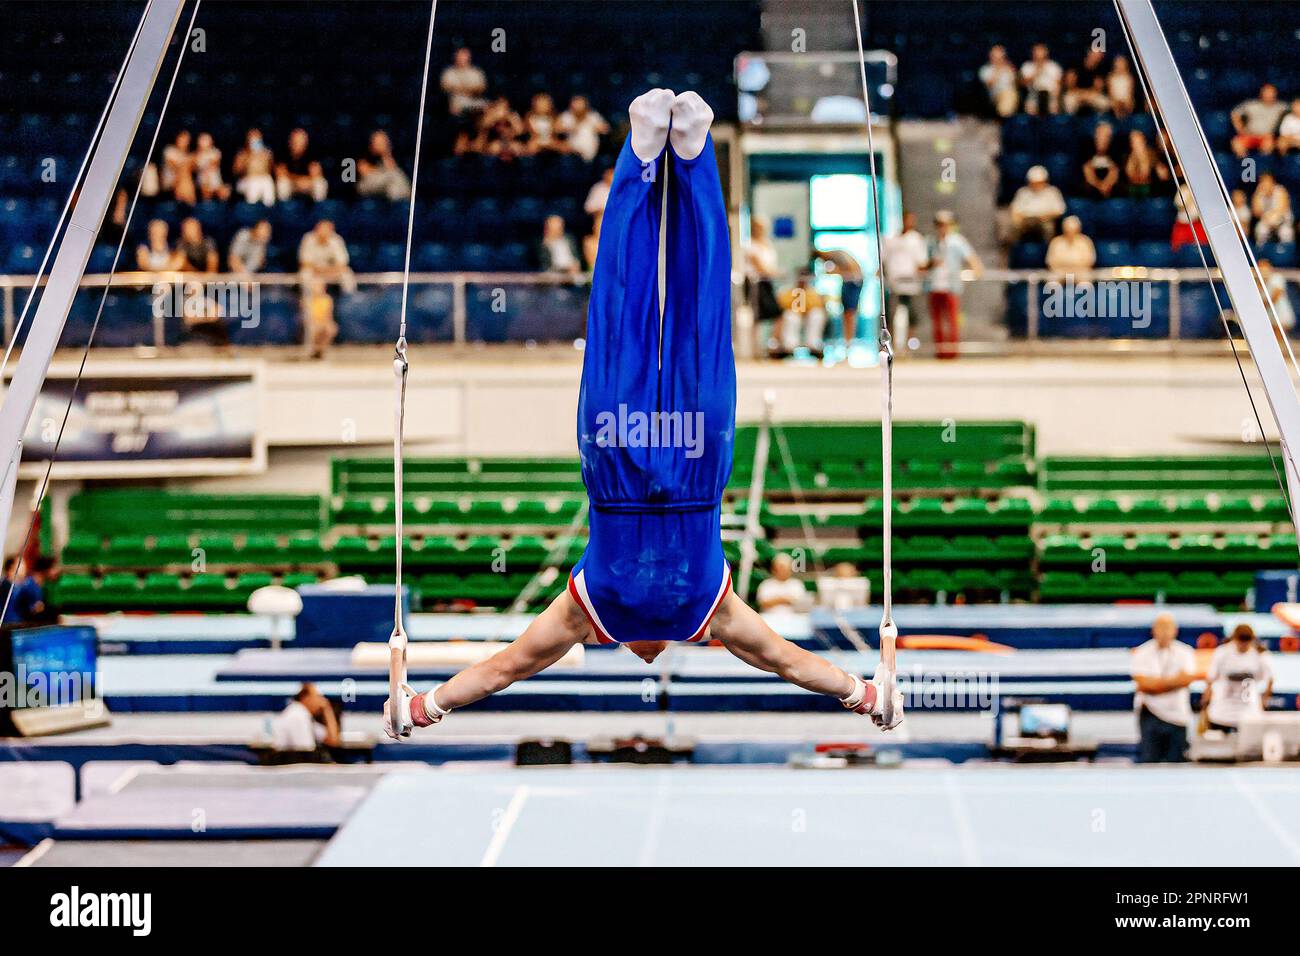 athlete gymnast exercise ring frame in championship gymnastics artistic, summer sport games Stock Photo